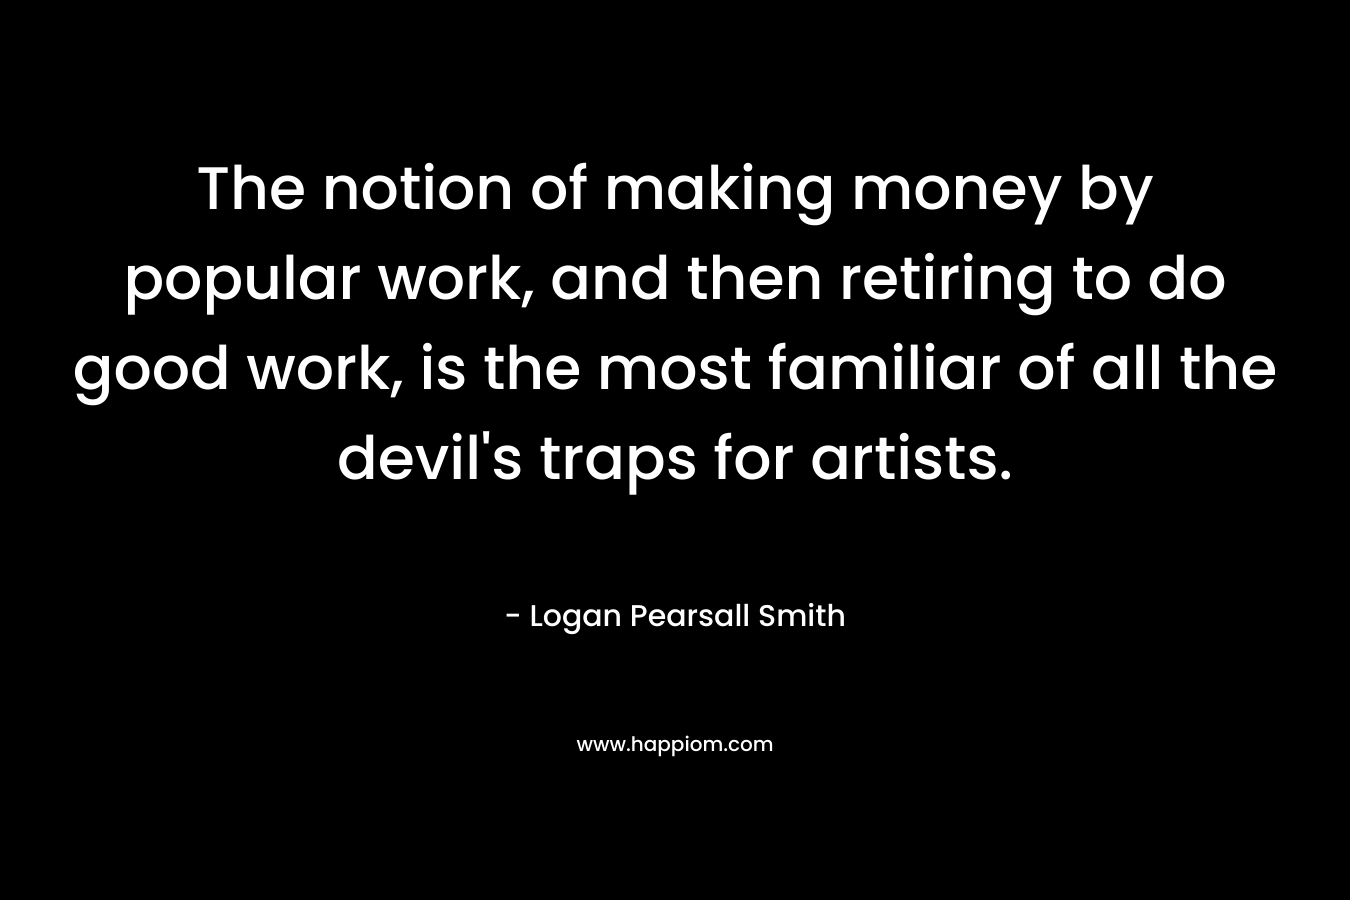 The notion of making money by popular work, and then retiring to do good work, is the most familiar of all the devil’s traps for artists. – Logan Pearsall Smith